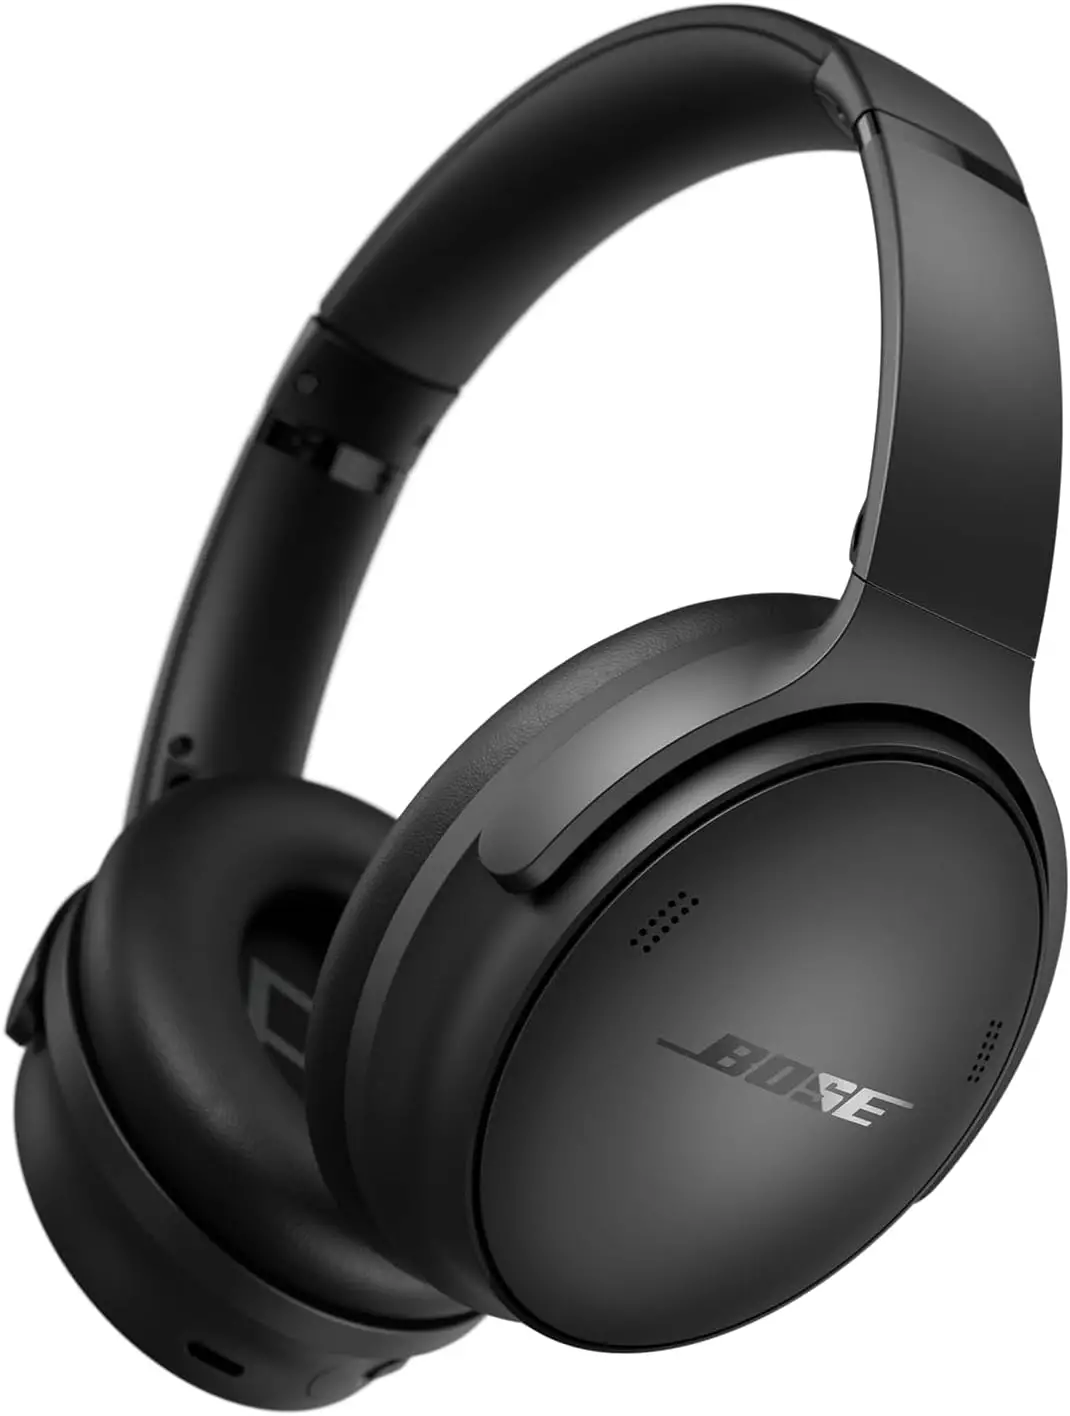 Bose NEW QuietComfort Wireless Noise Cancelling Headphones Bluetooth Over Ear Headphones with Up To 24 Hours of Battery Life Black